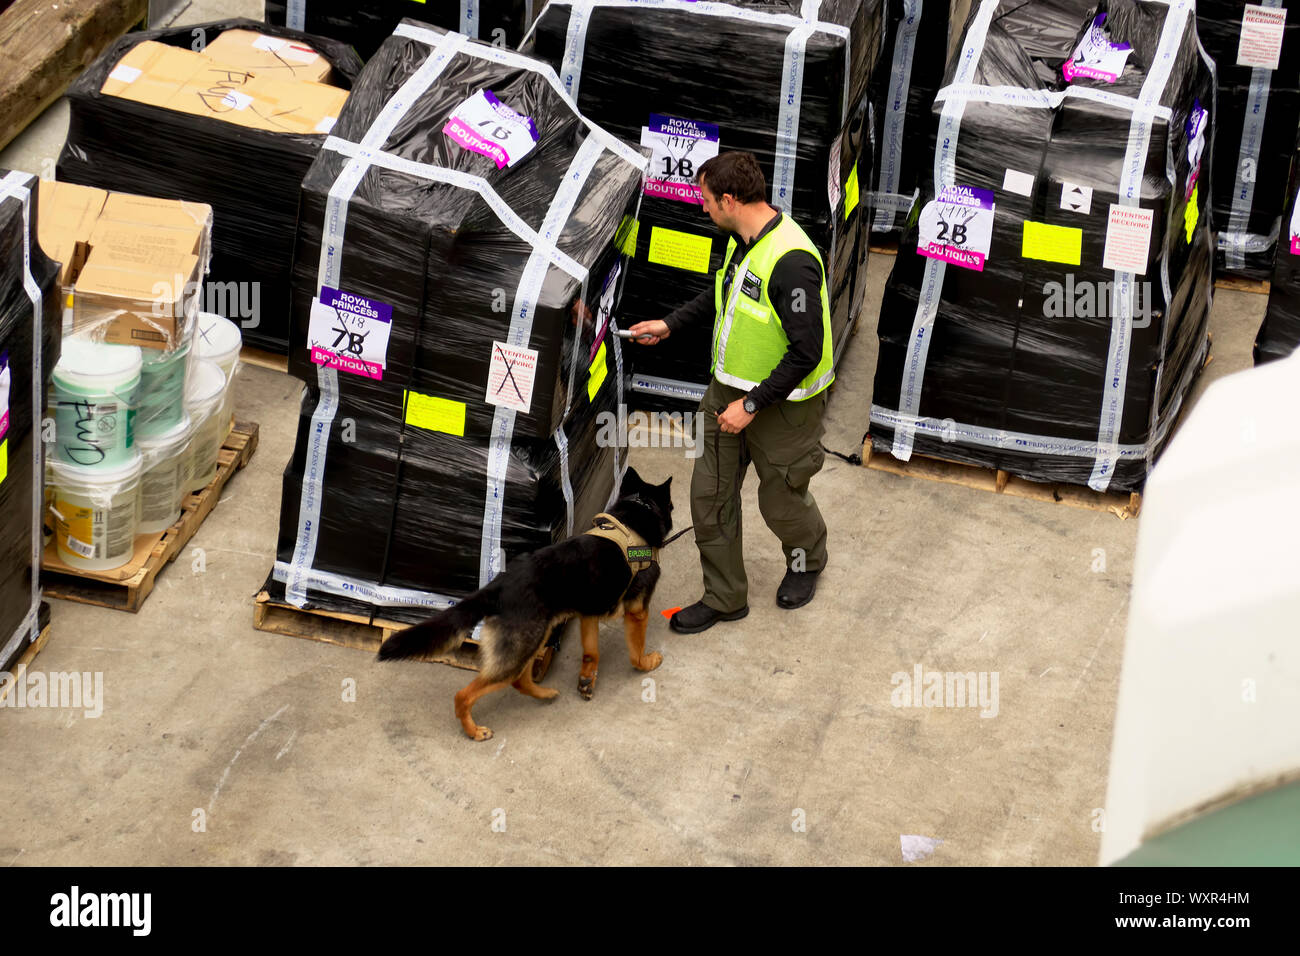 K9 Detection Unit Checking for Explosives on the Royal Princess Cruise Ship at Port of Vancouver, Vancouver, B. C., Canada Stock Photo